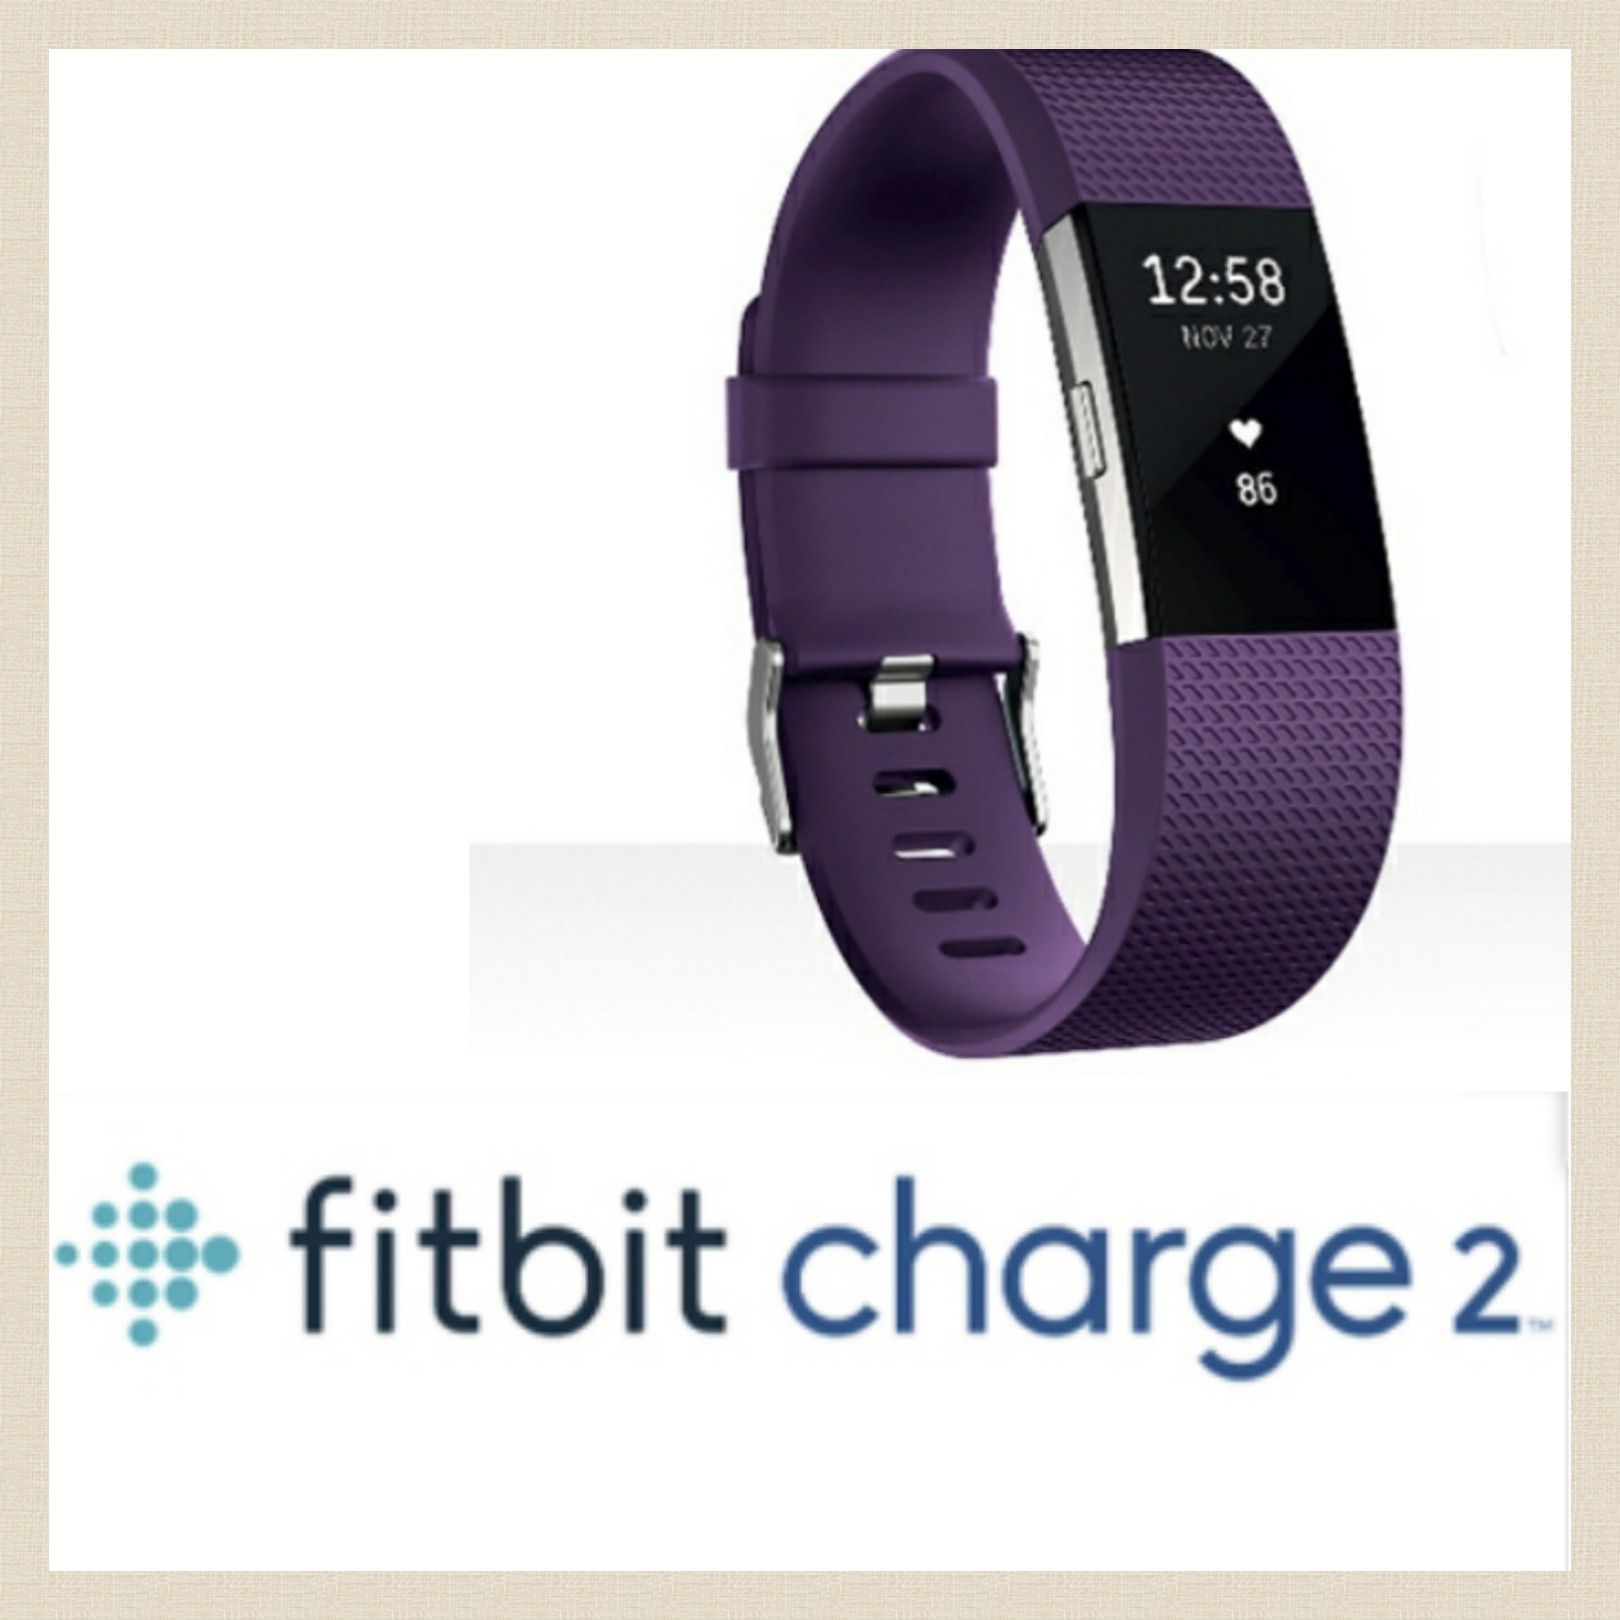 Fitbit Charge 2 plus bands